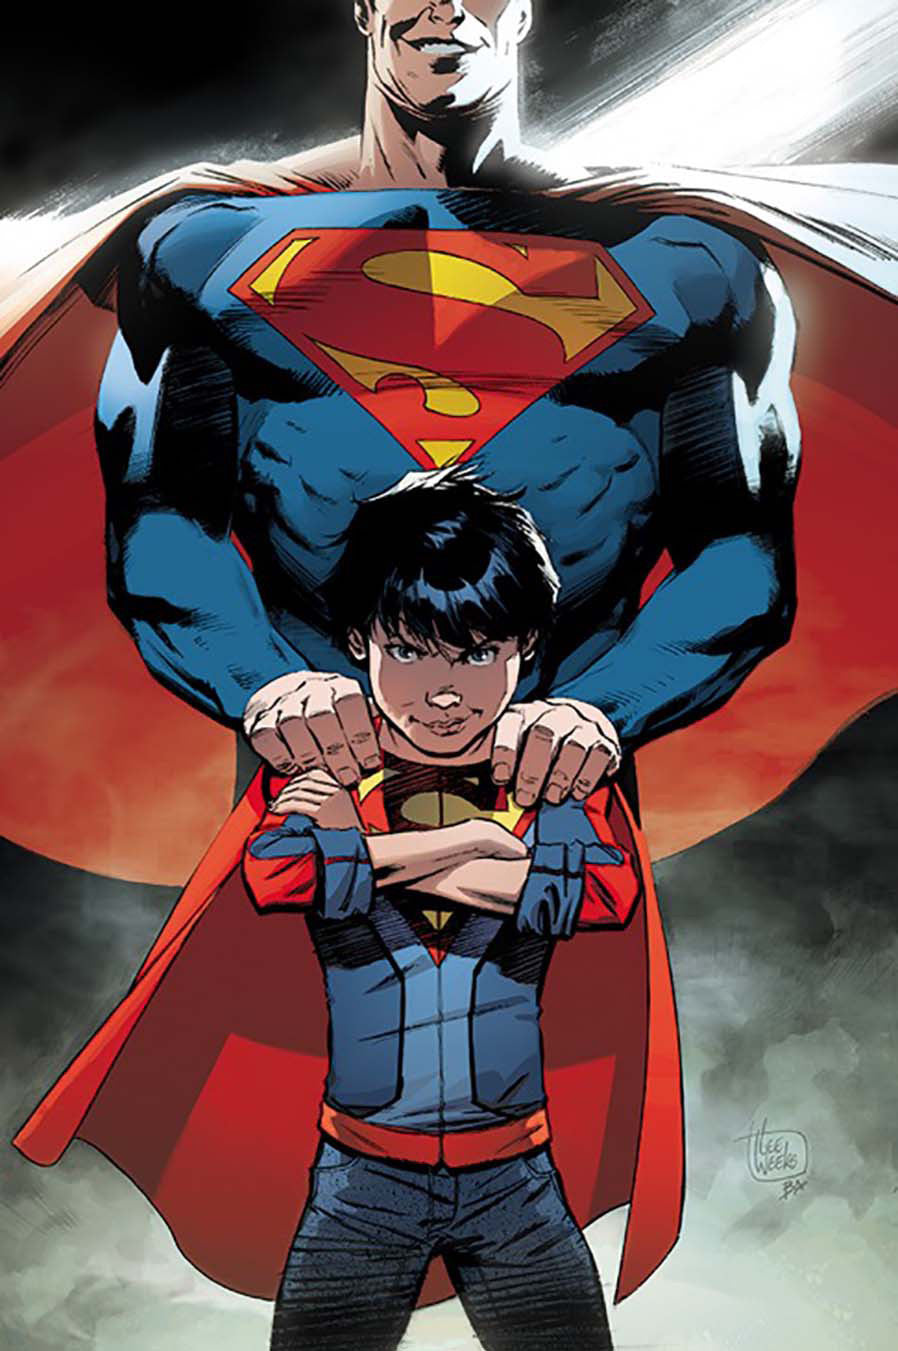 SUPERMAN #26 COVER